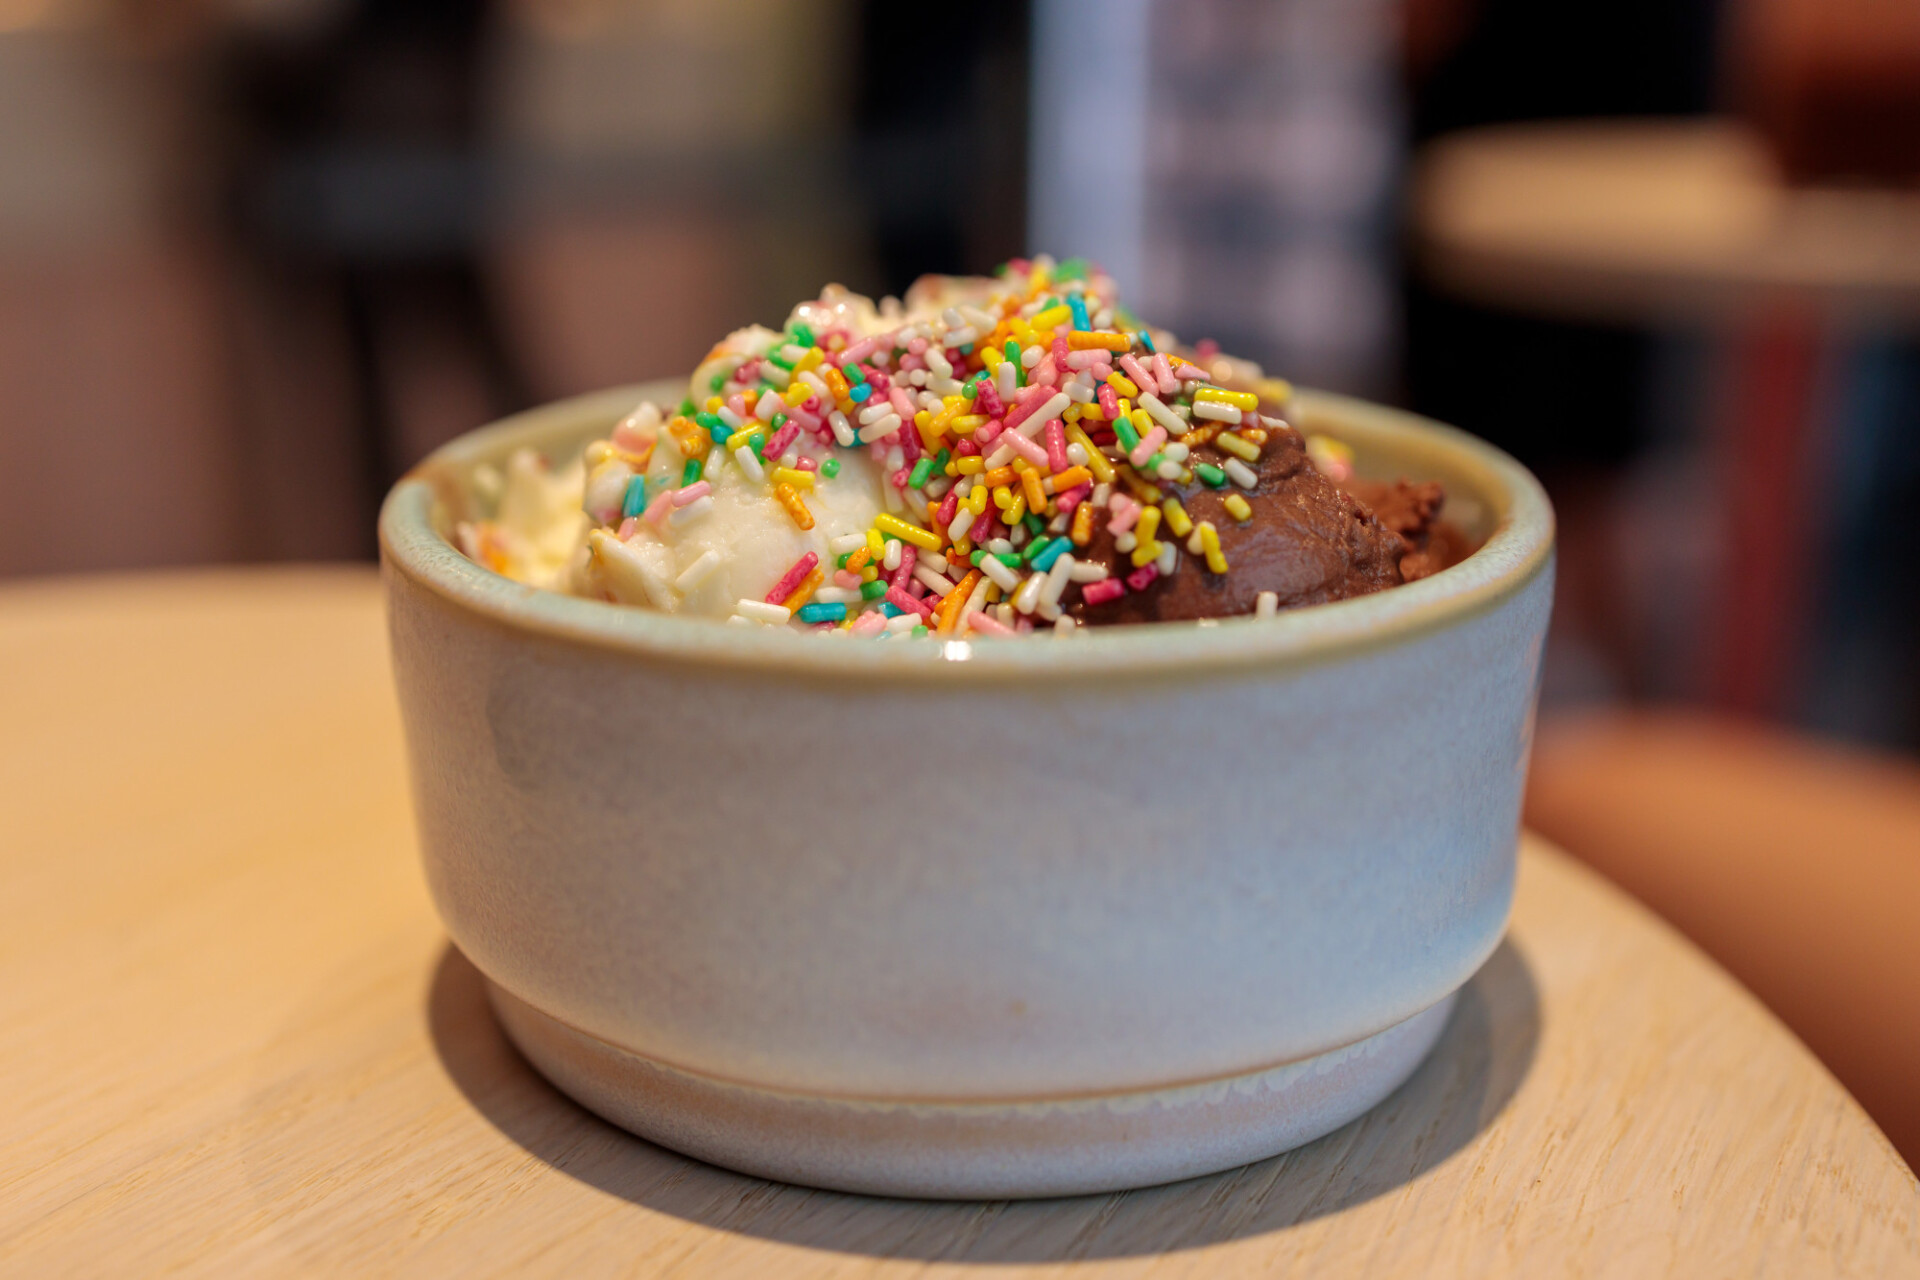 Vanilla and chocolate ice cream with colorful sprinkles